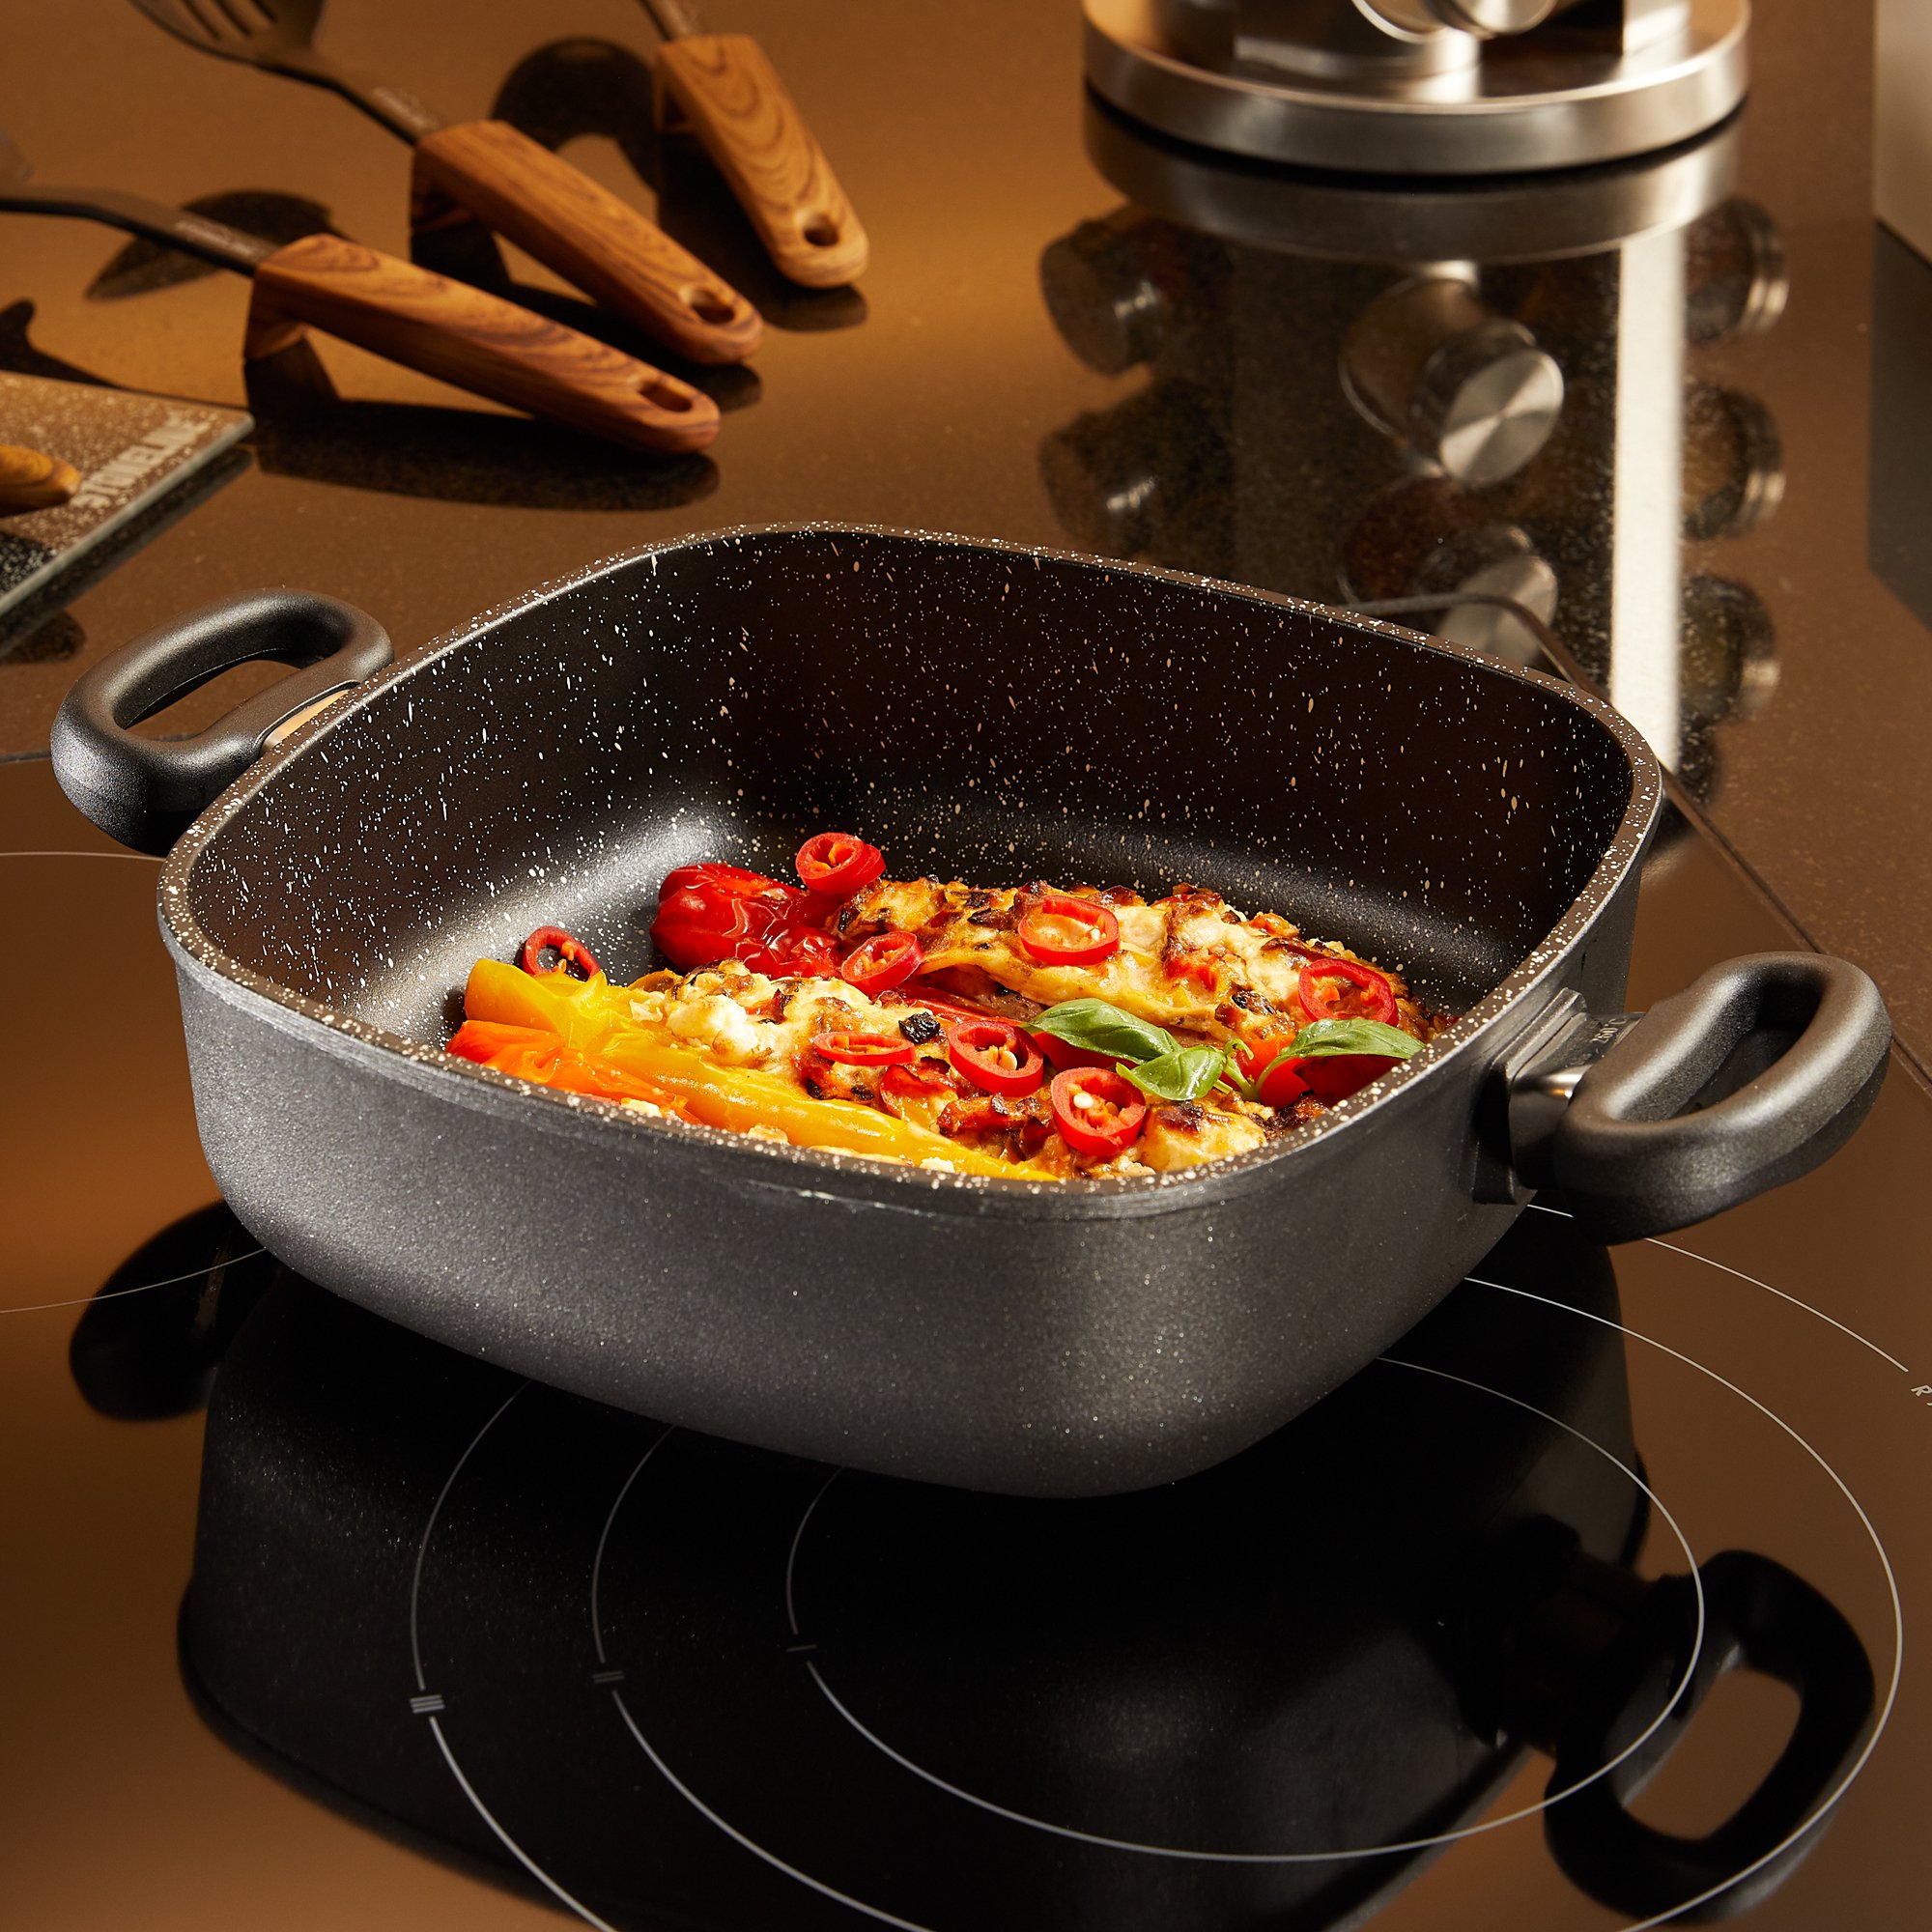 STONELINE® Square Serving Pan 24 cm, with Lid, Cast Non-Stick Pan | Made in Germany